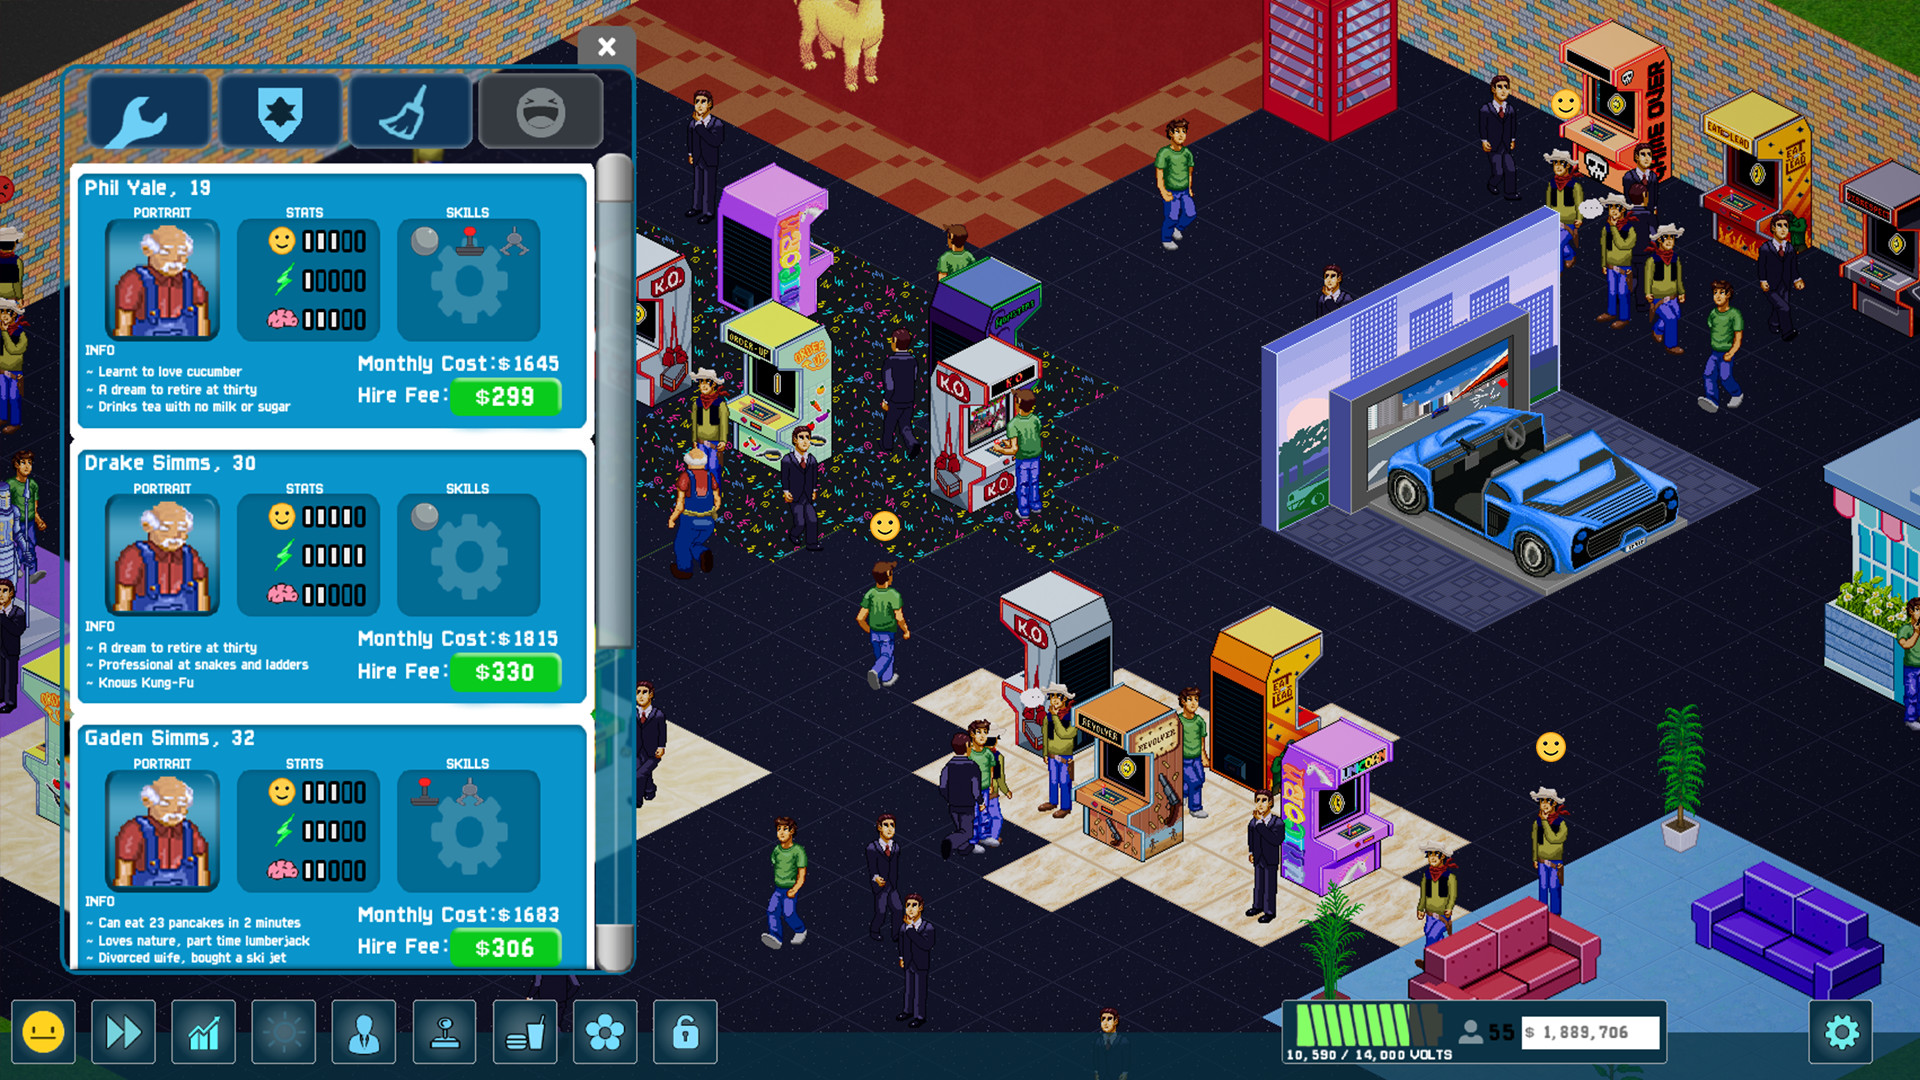 download the new version for iphoneHacker Simulator PC Tycoon